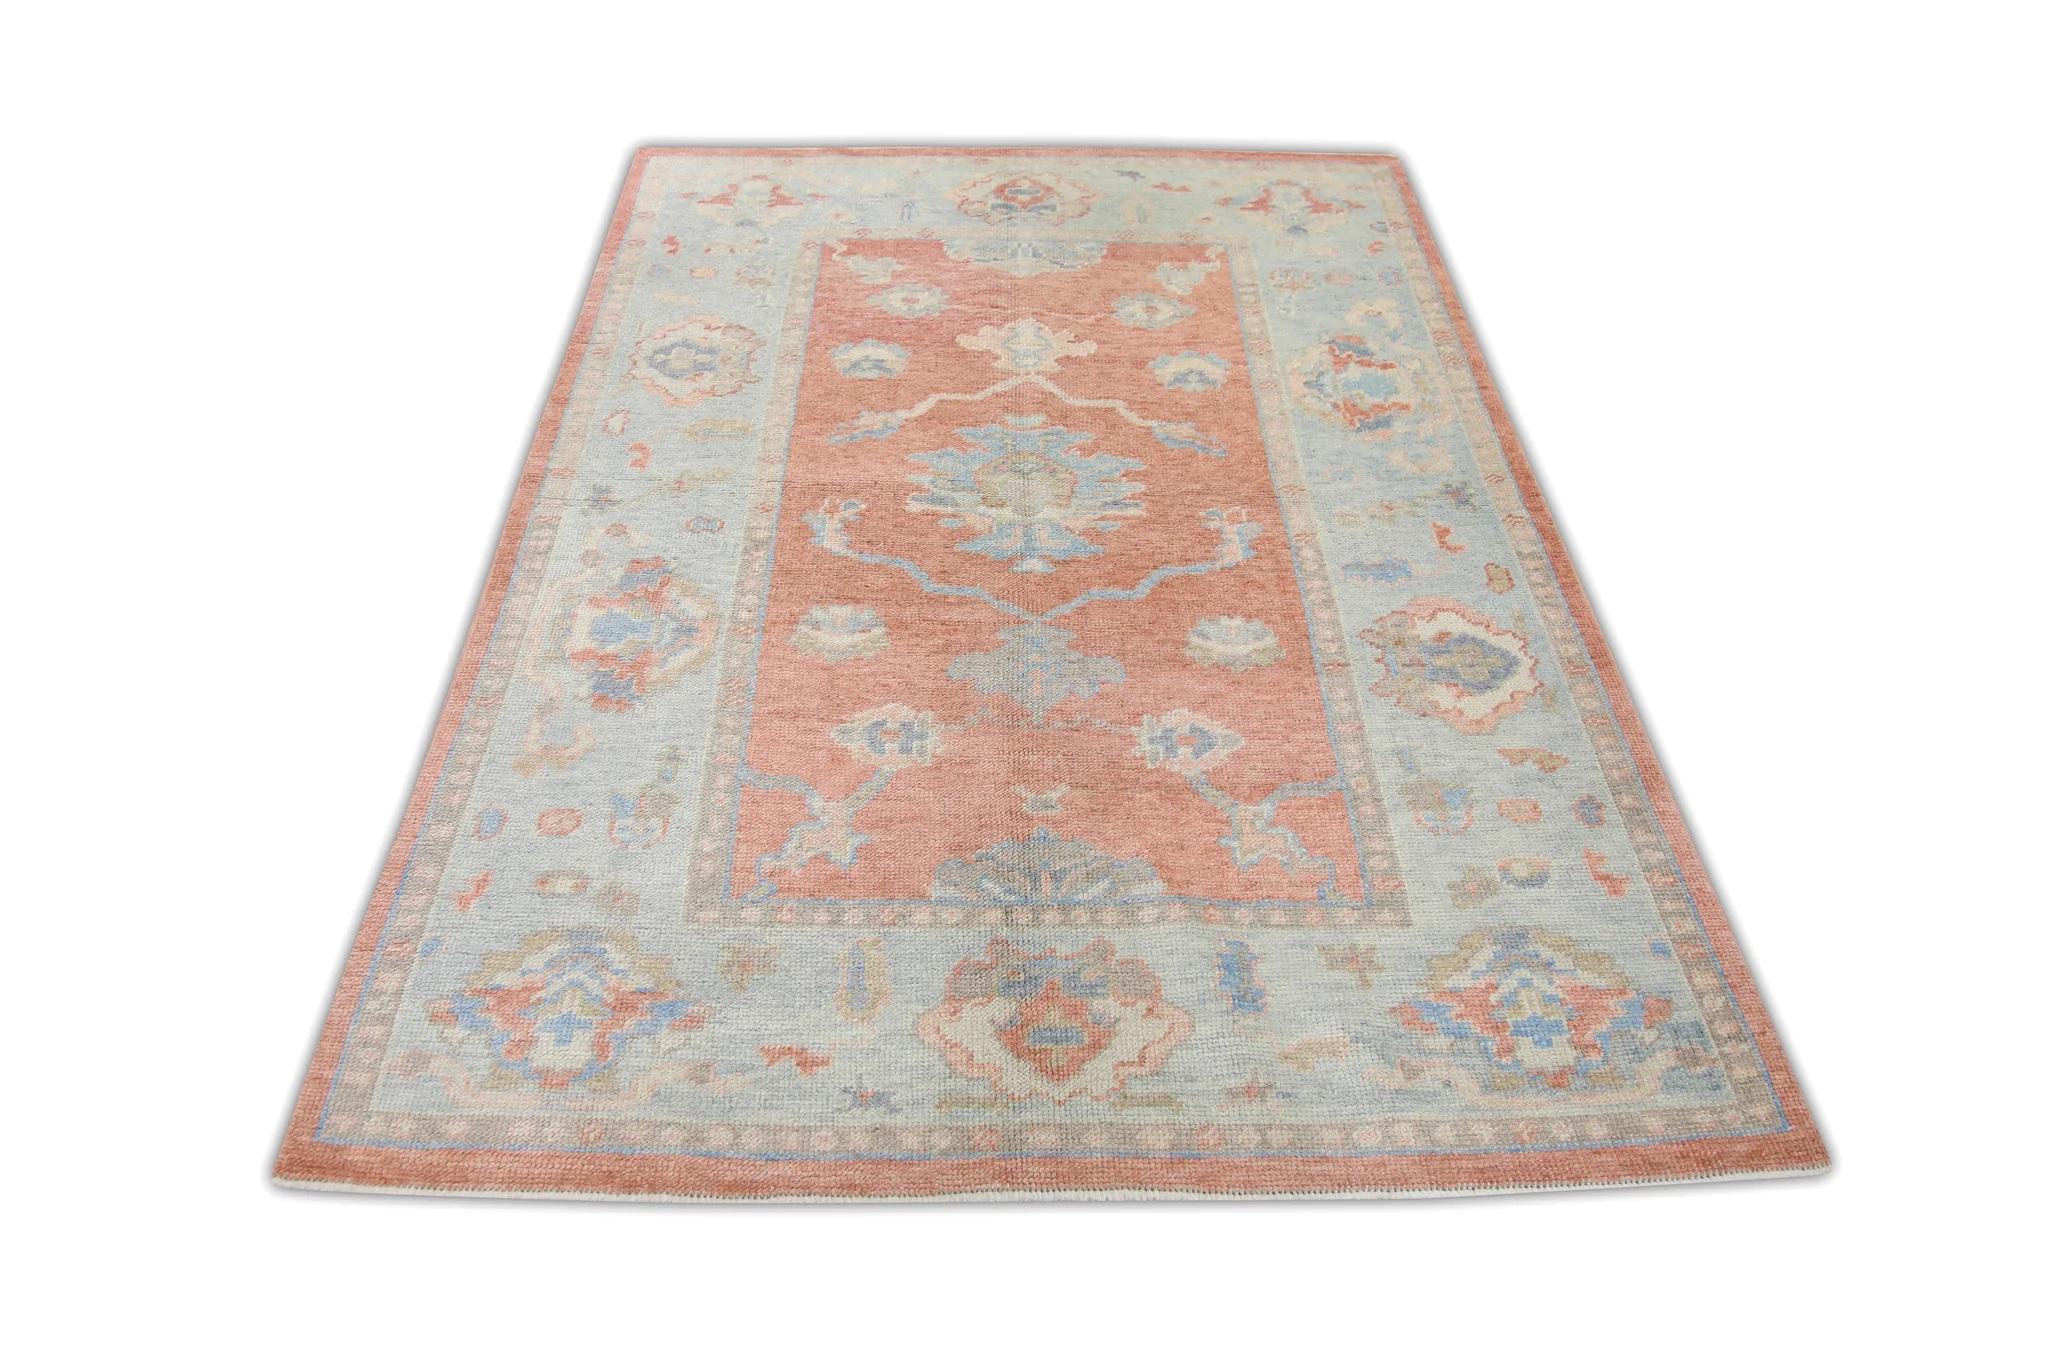 Red Handwoven Wool Turkish Oushak Rug in Blue Floral Pattern 4'9